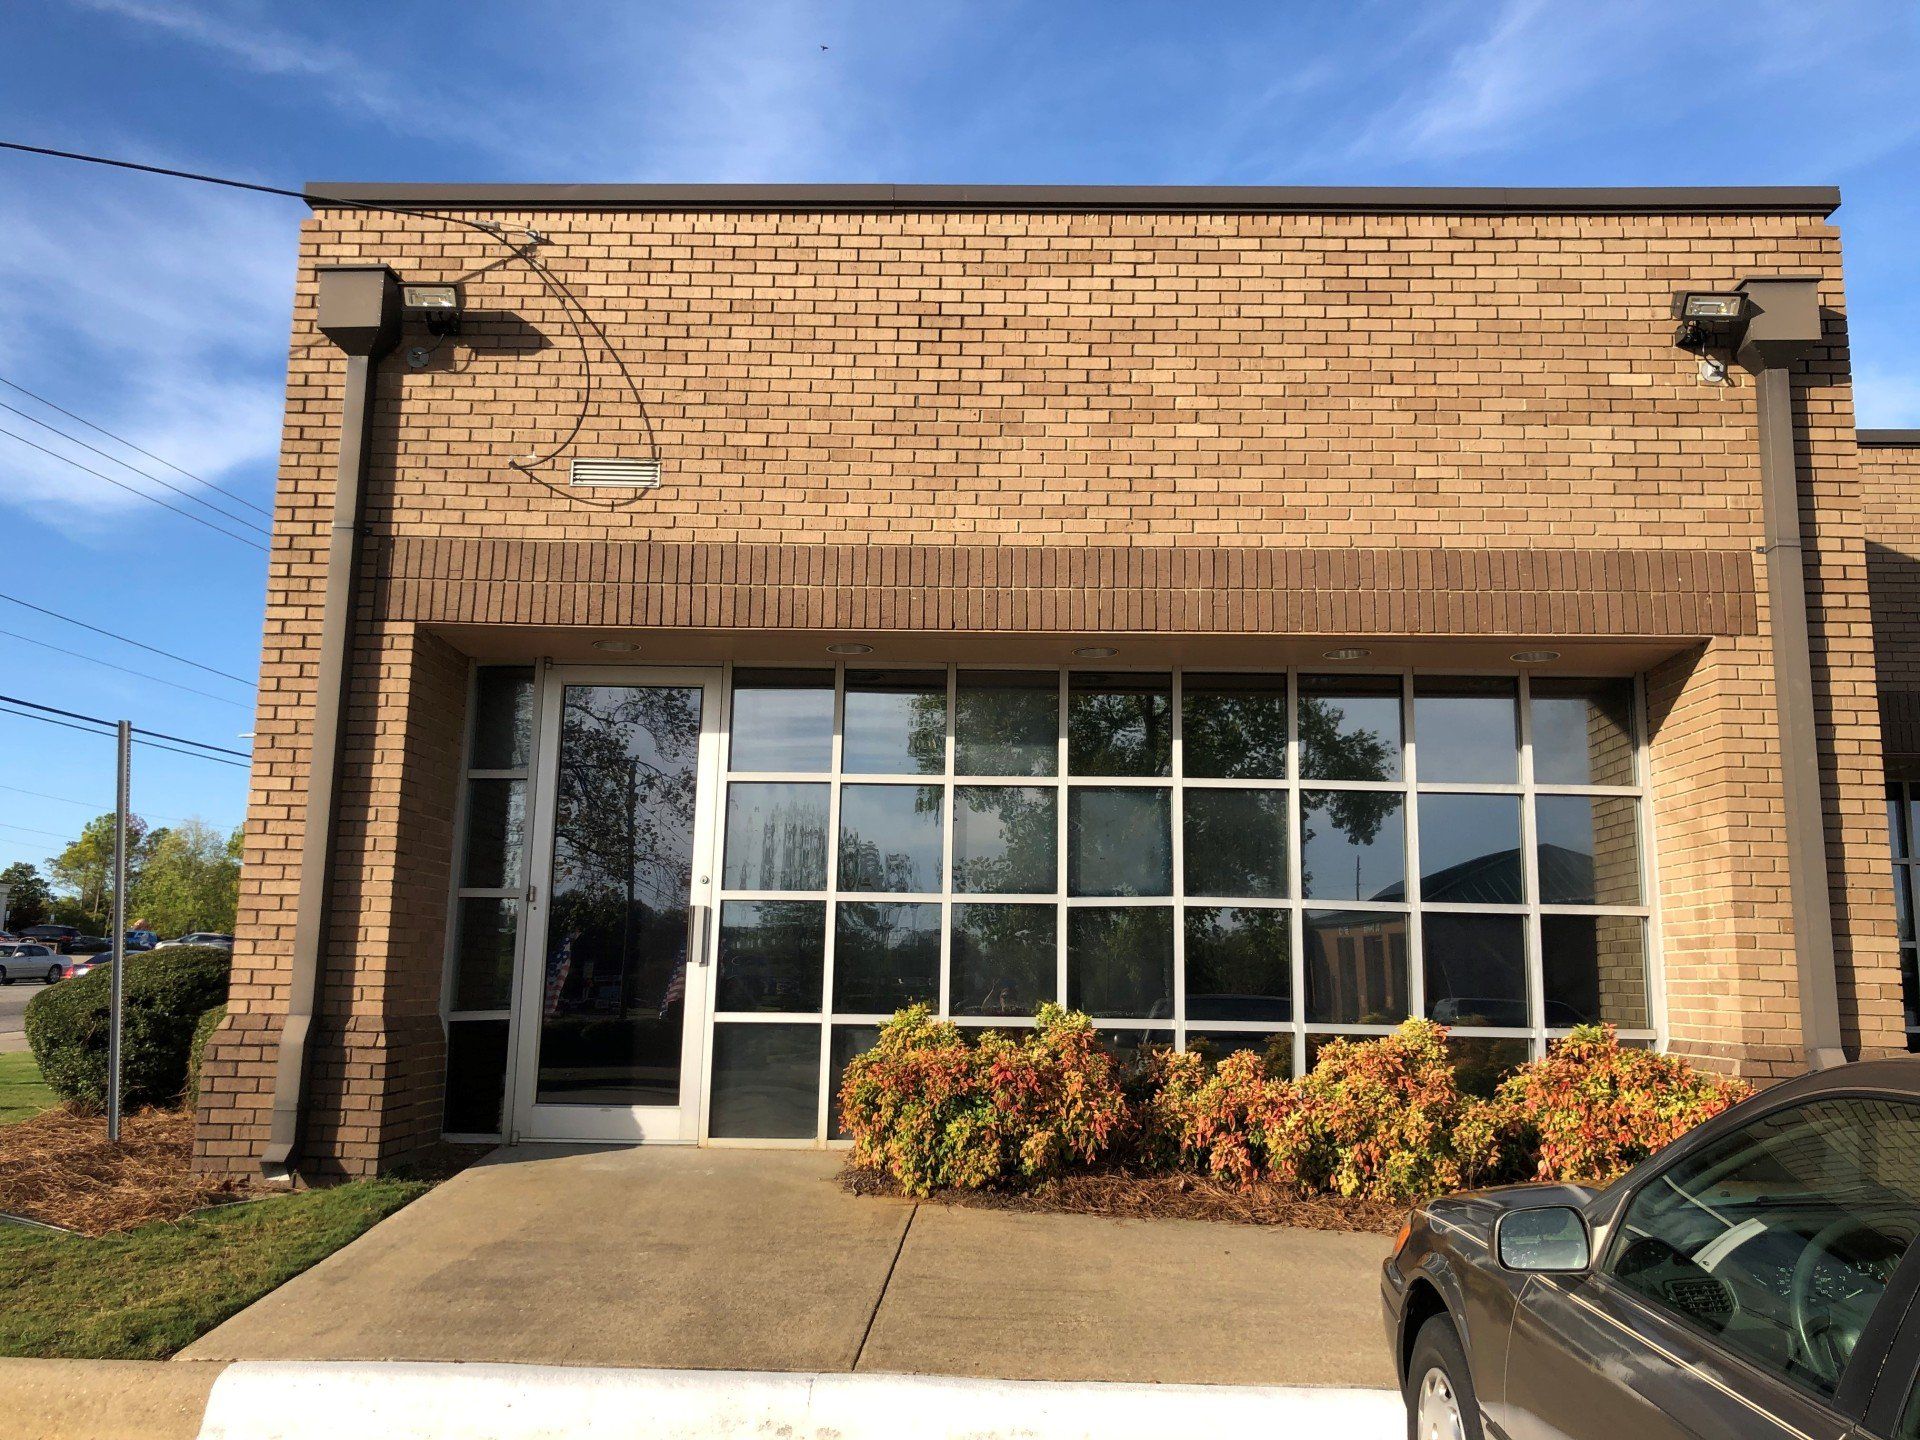 Professional commercial tinting at another Fire Department location in October 2019 - Business tint in Alabama